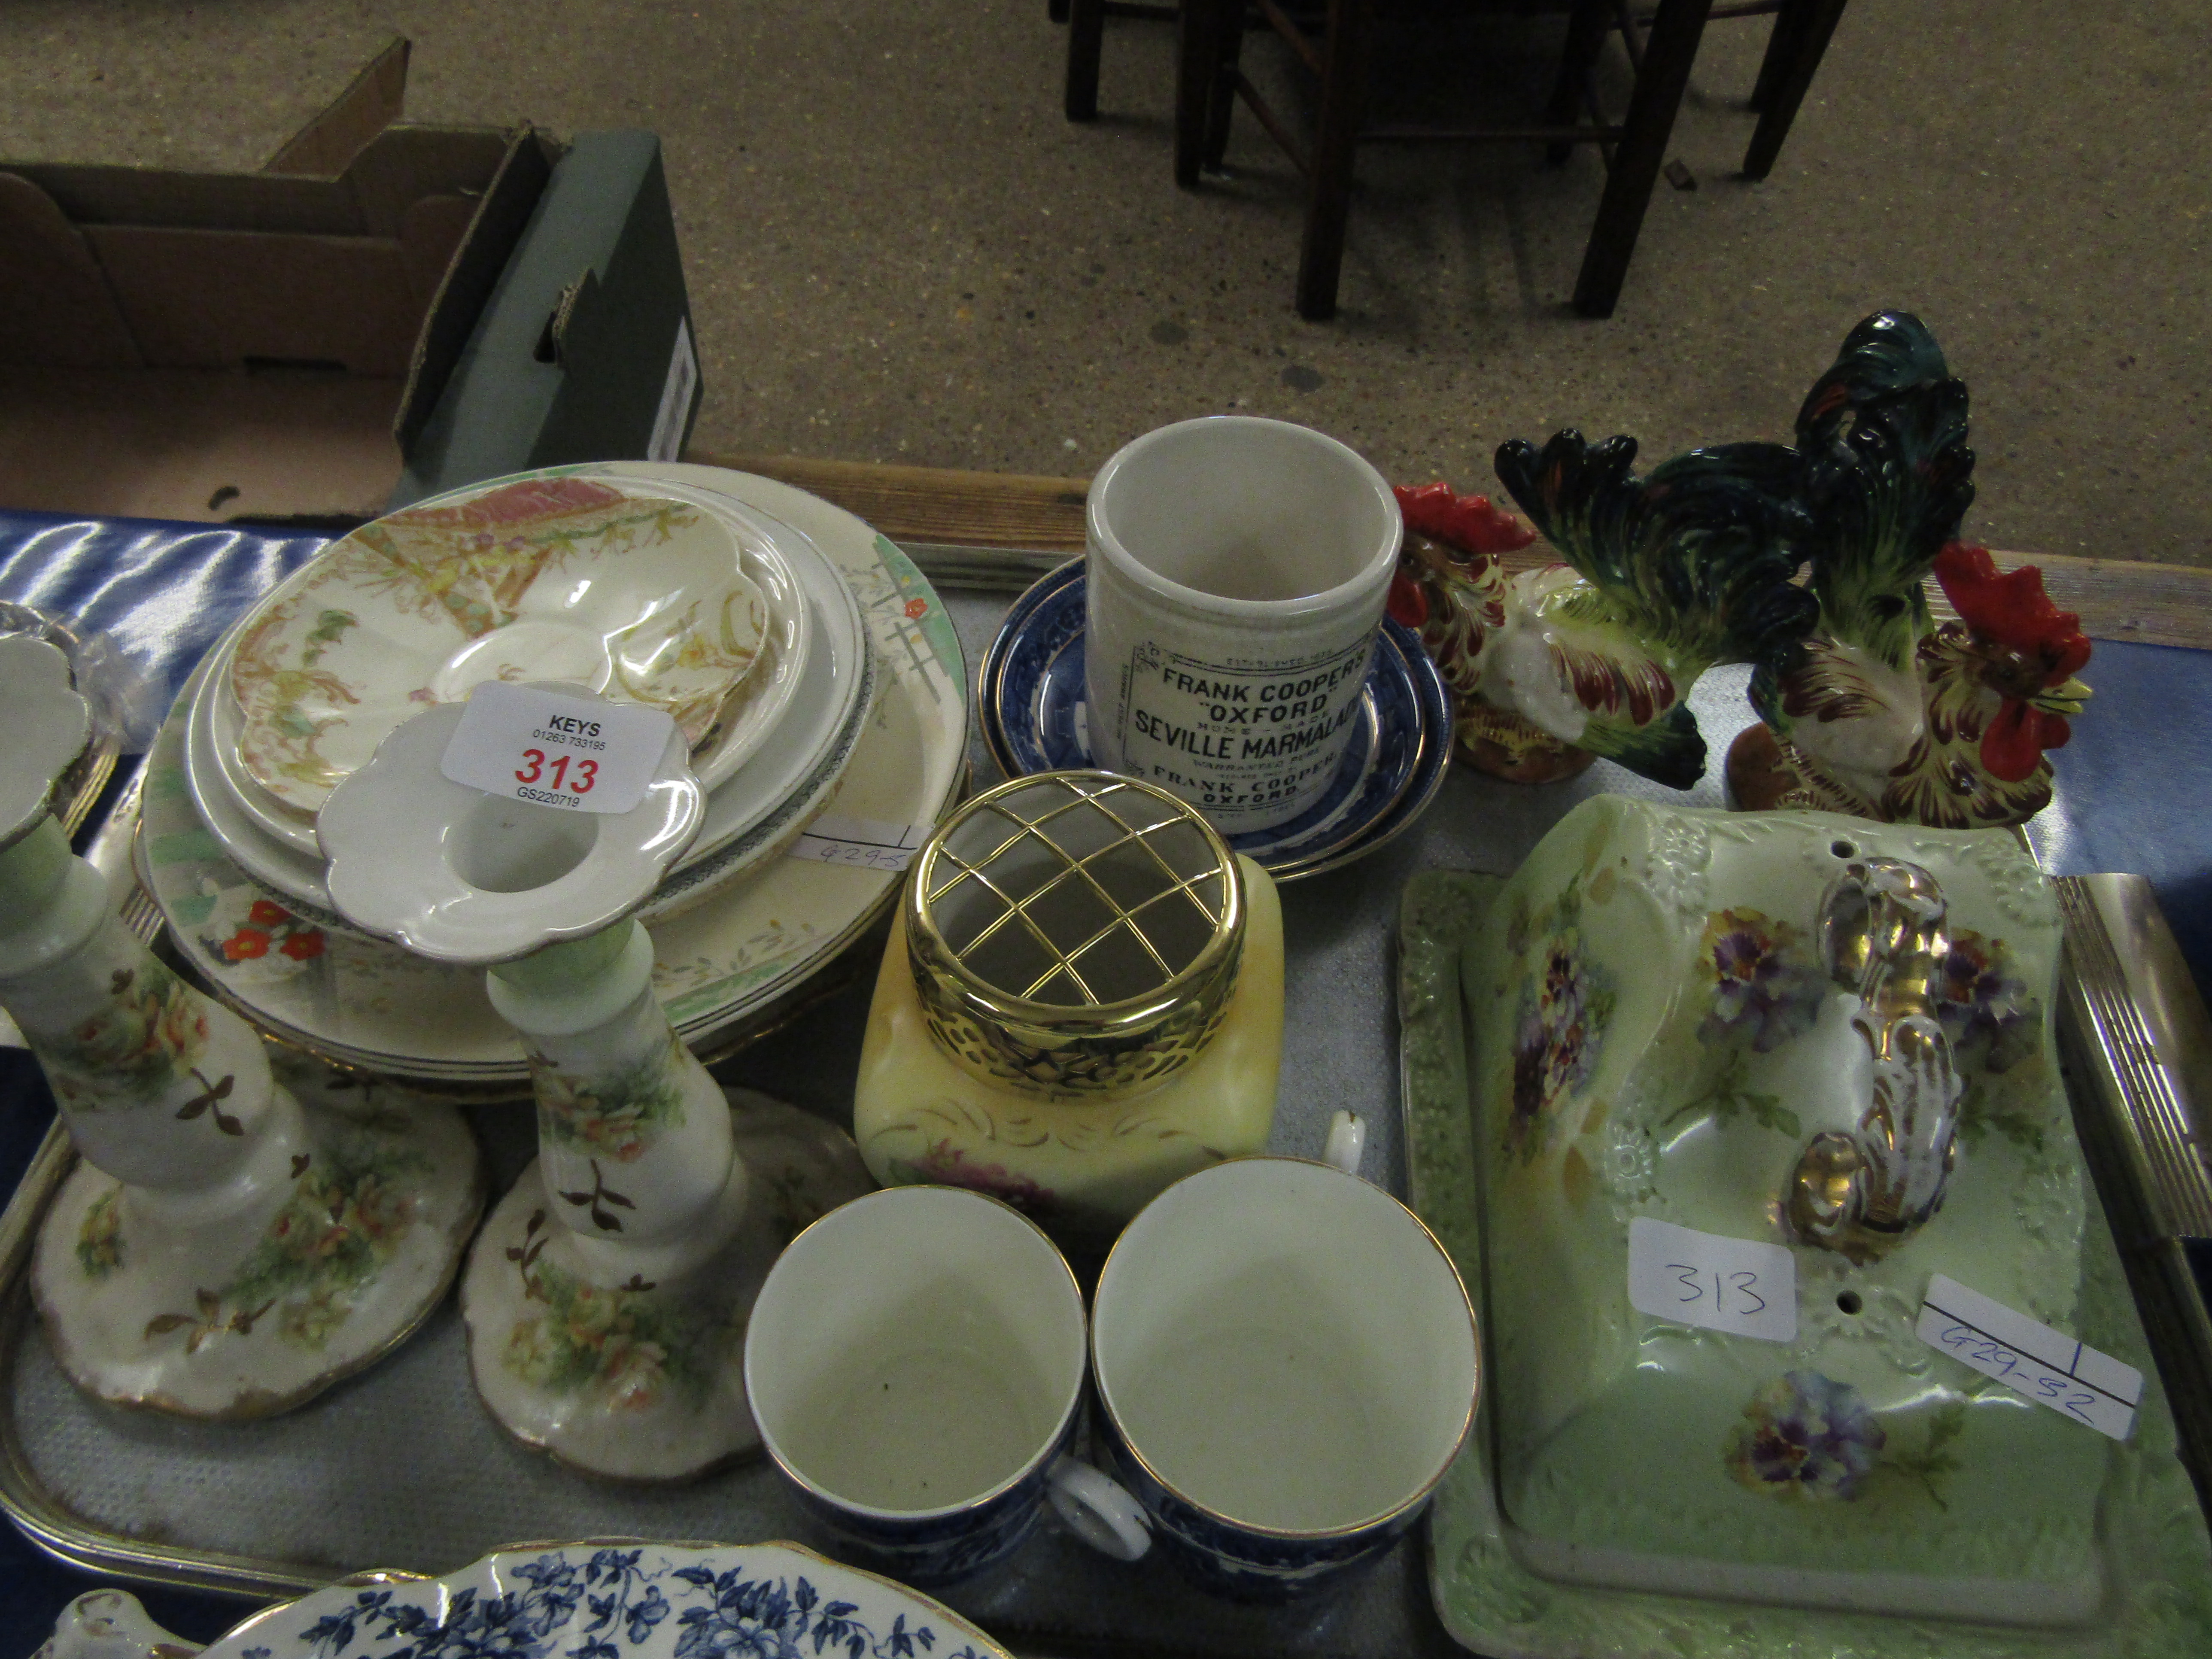 TRAY CONTAINING COCKLE ORNAMENTS, PLATES, BUTTER DISH ETC